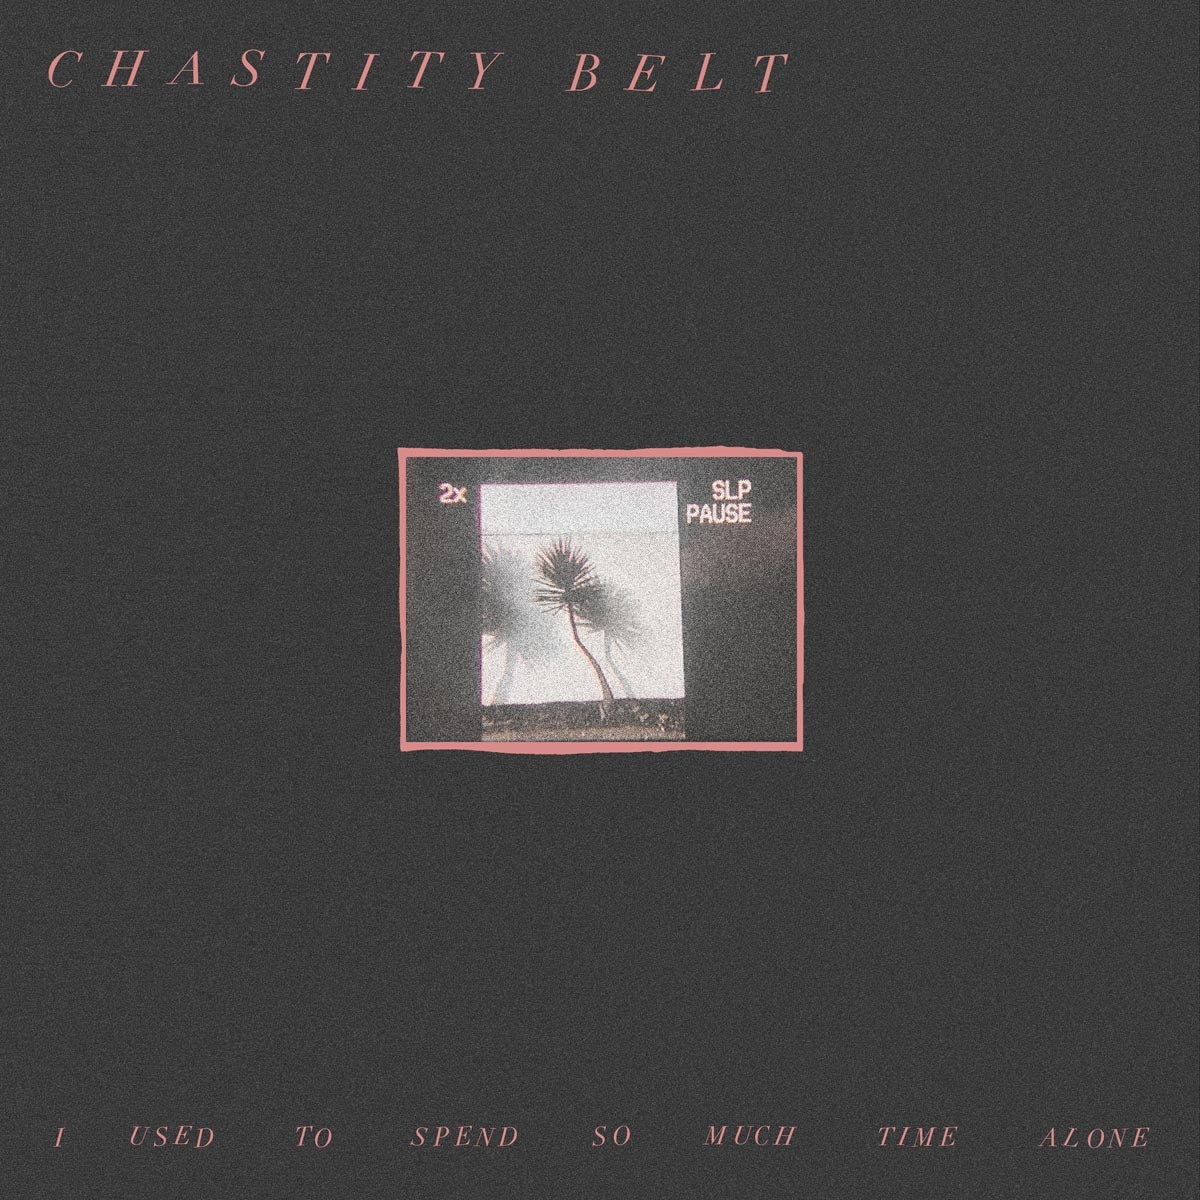 Chastity Belt - I Used To Spend So Much Time Alone (Col. Vinyl) - LP